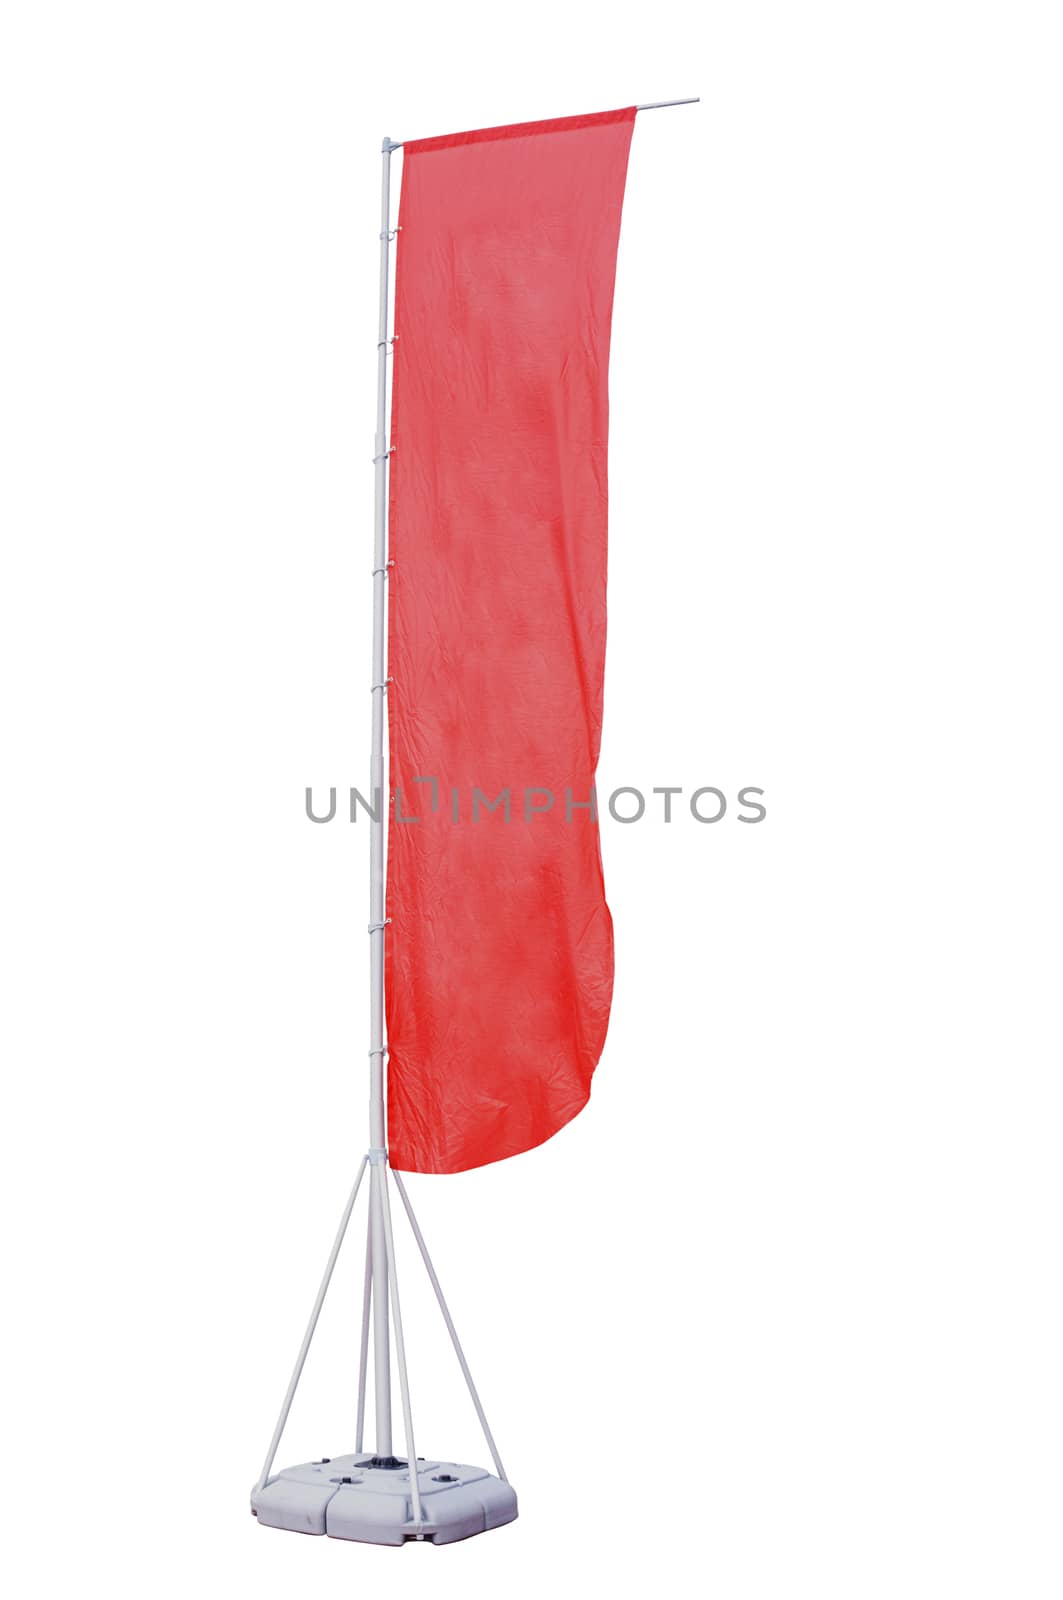 Advertising fabric flag by NuwatPhoto